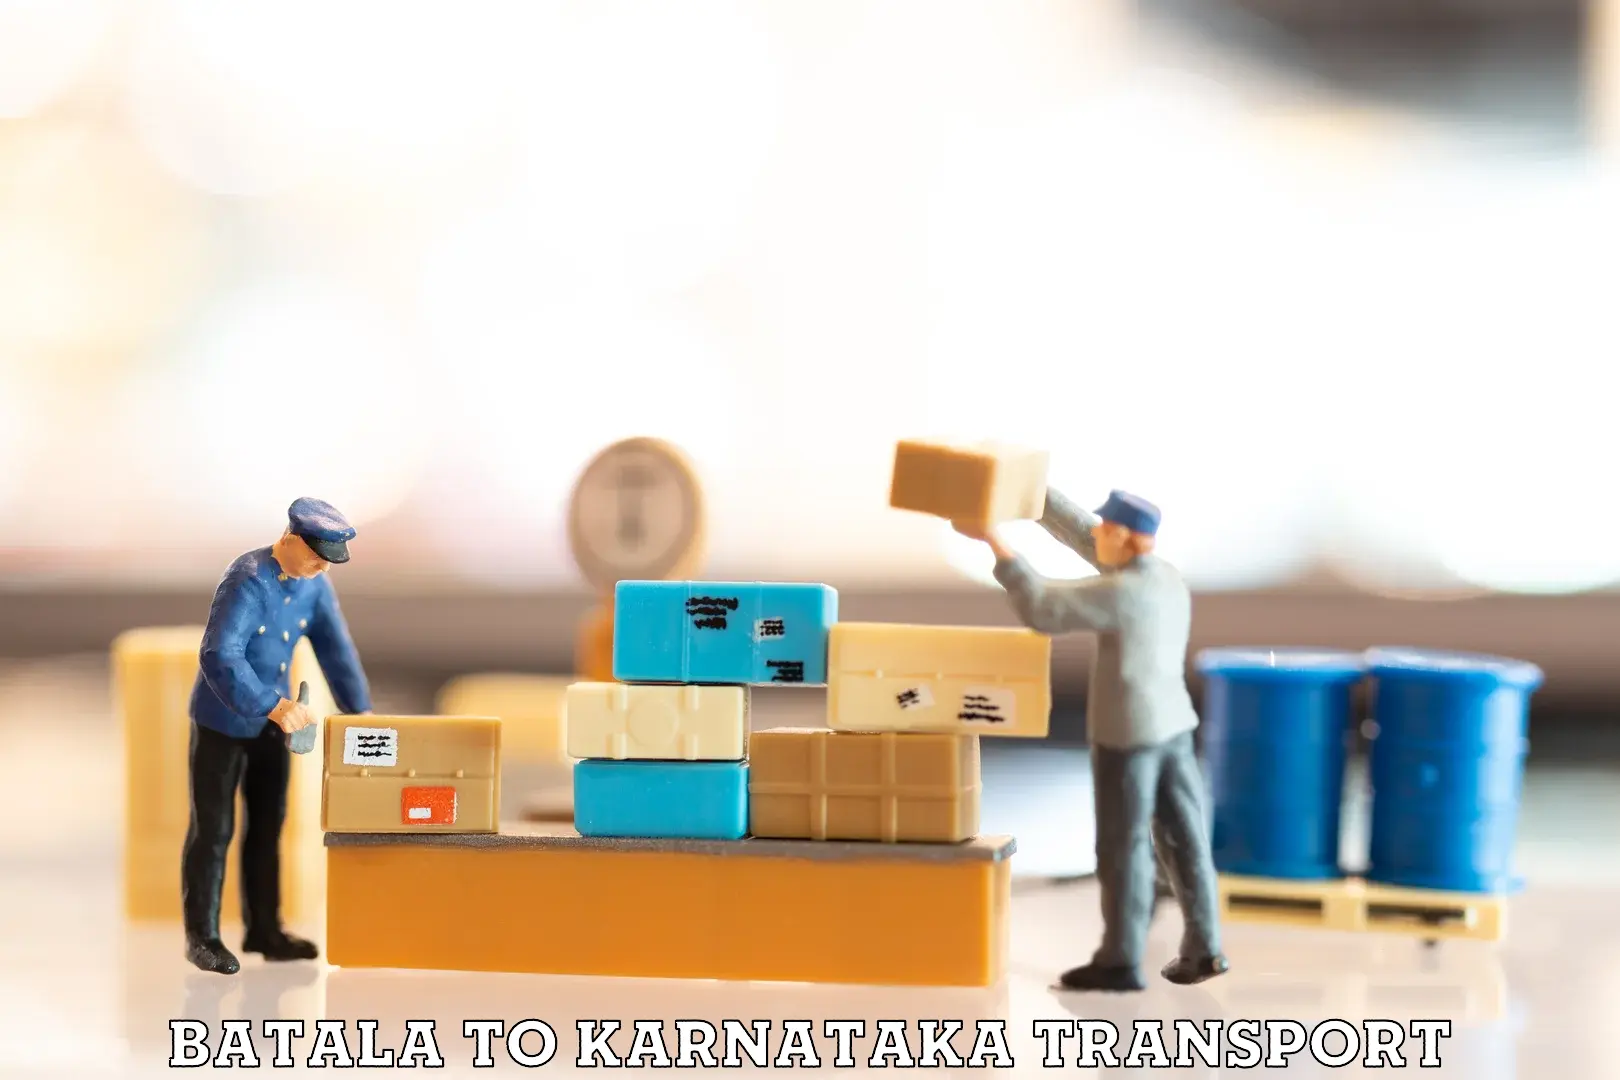 Truck transport companies in India Batala to Bangalore